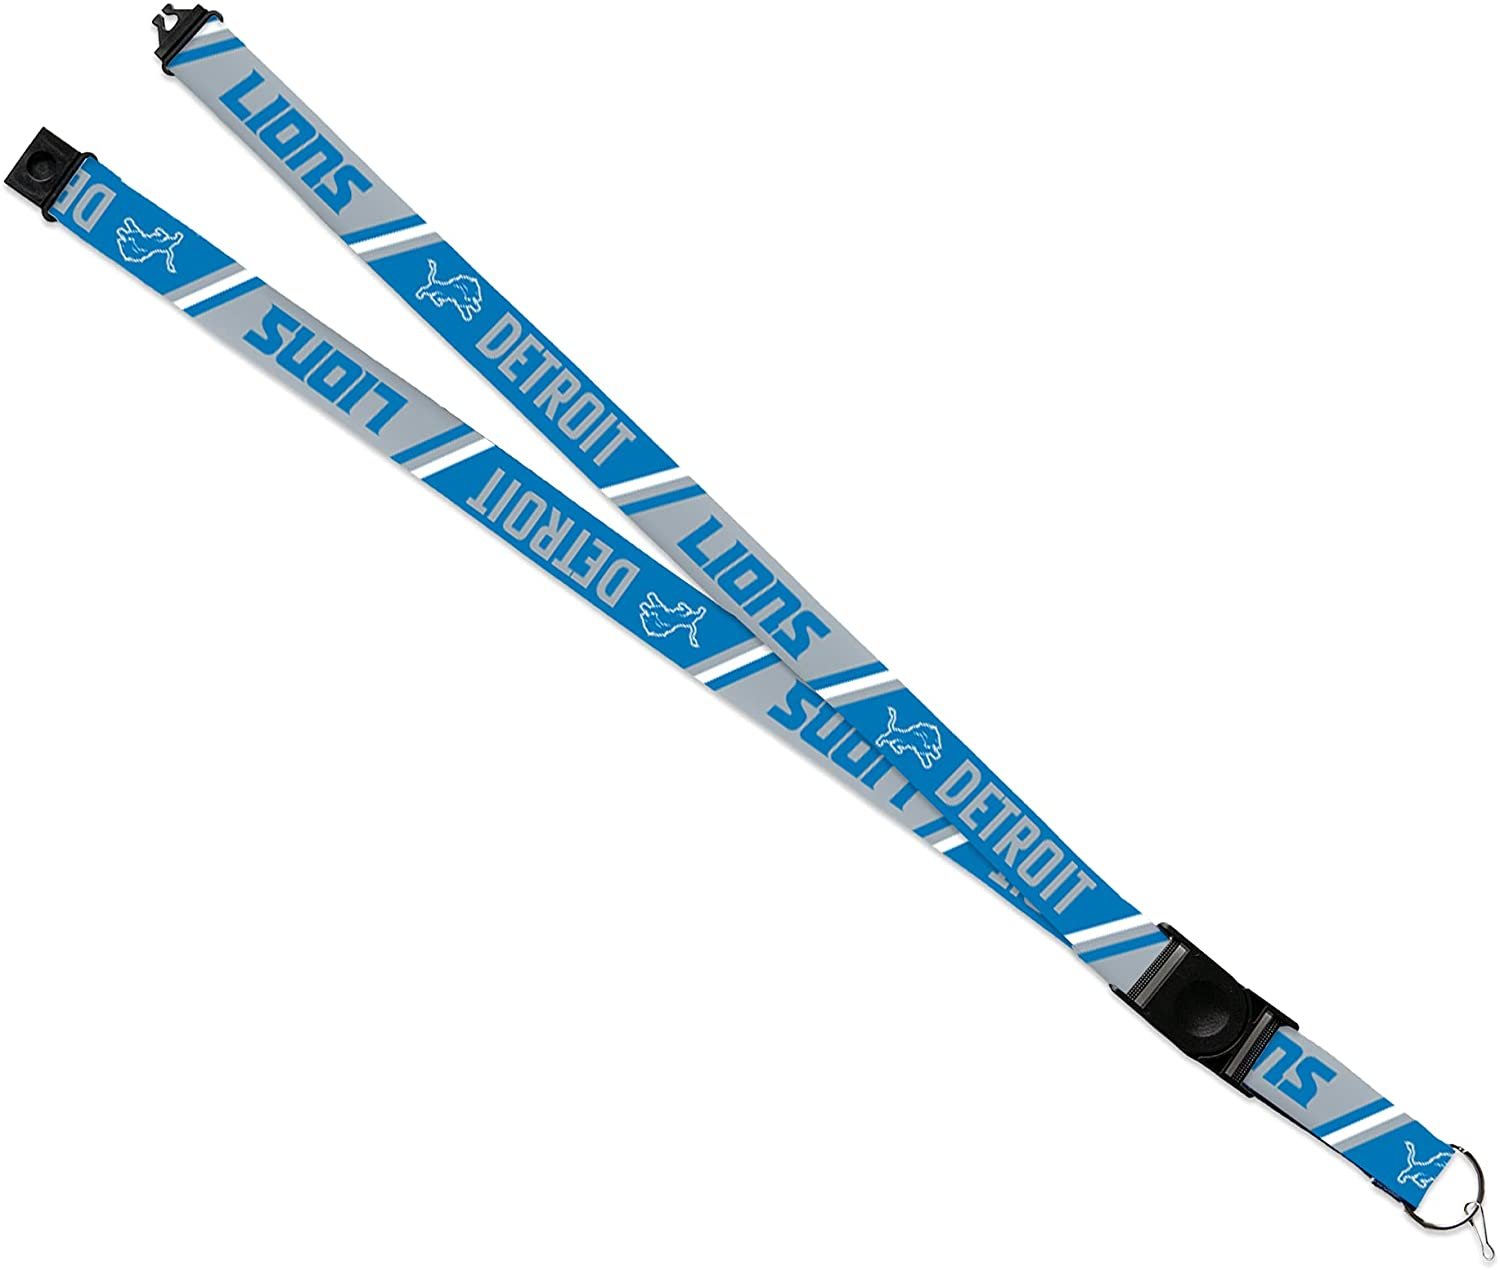 Detroit Lions Lanyard Keychain Double Sided Breakaway Safety Design Adult 18 Inch